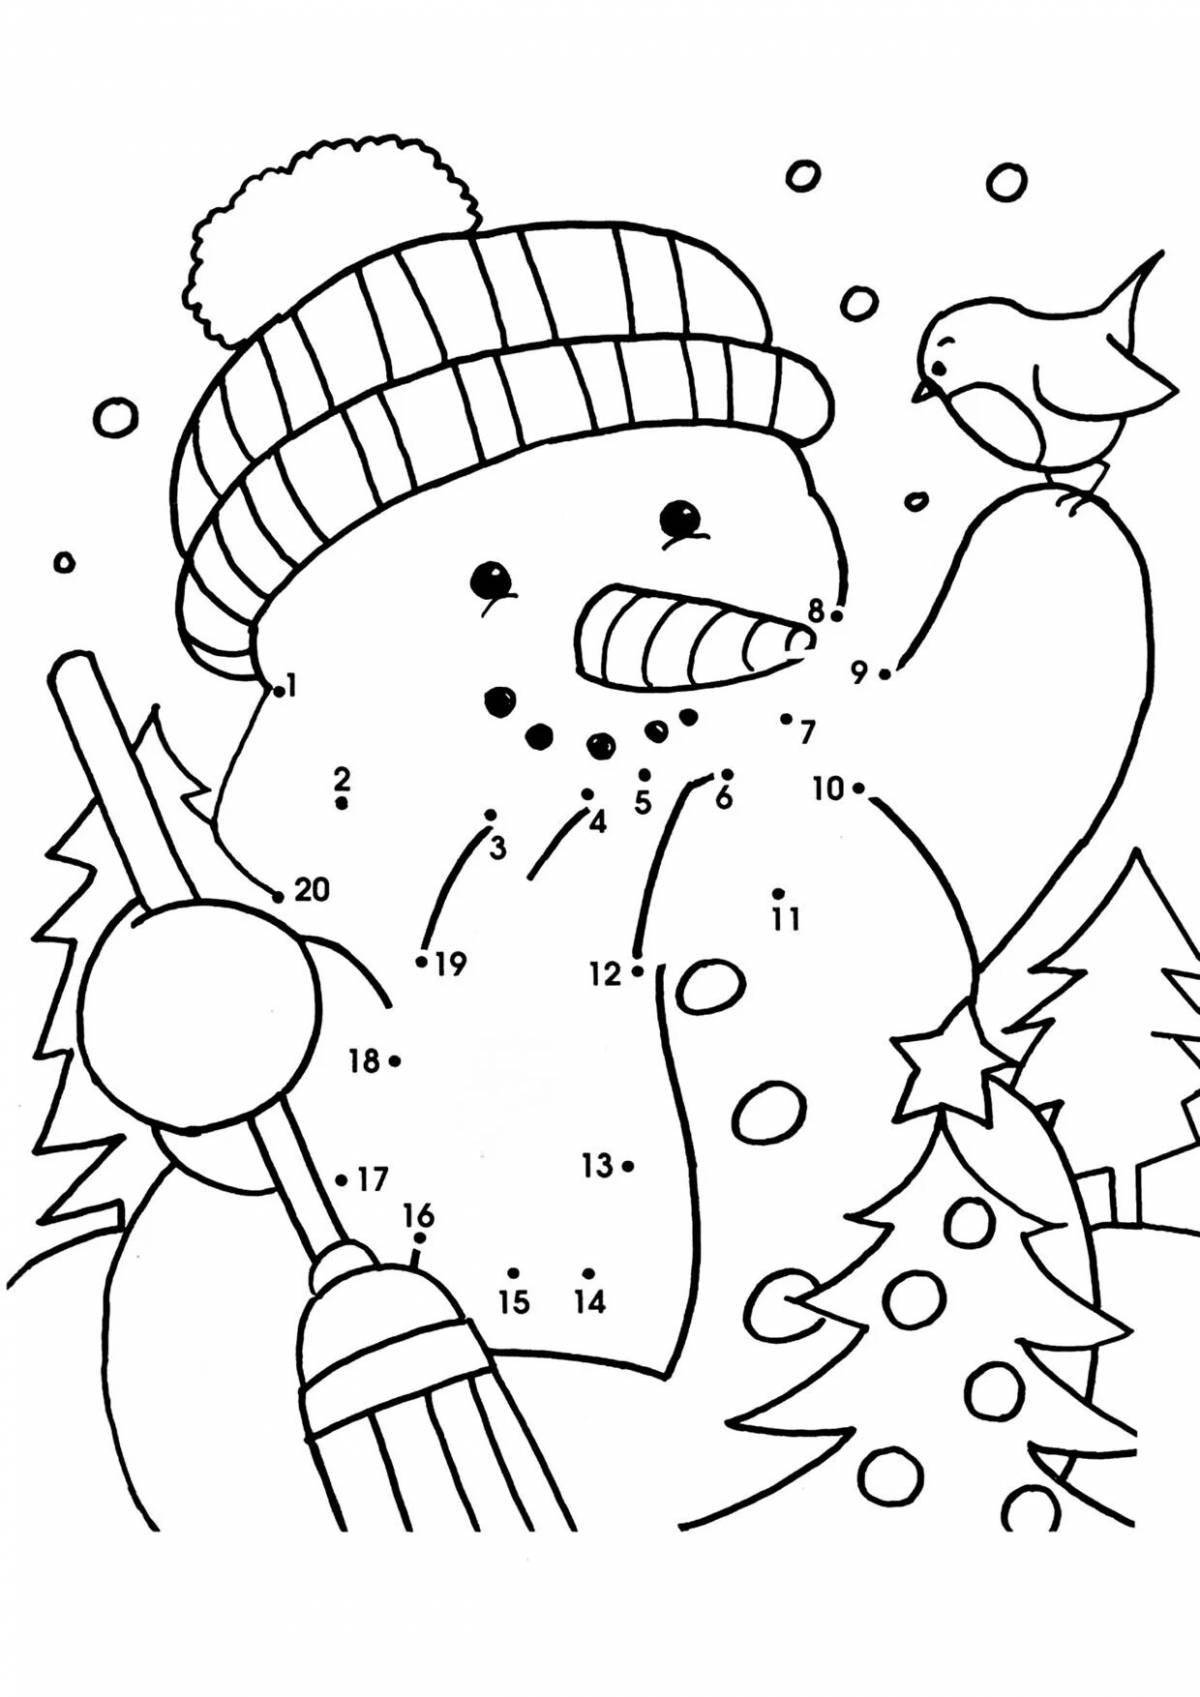 Great winter math coloring book